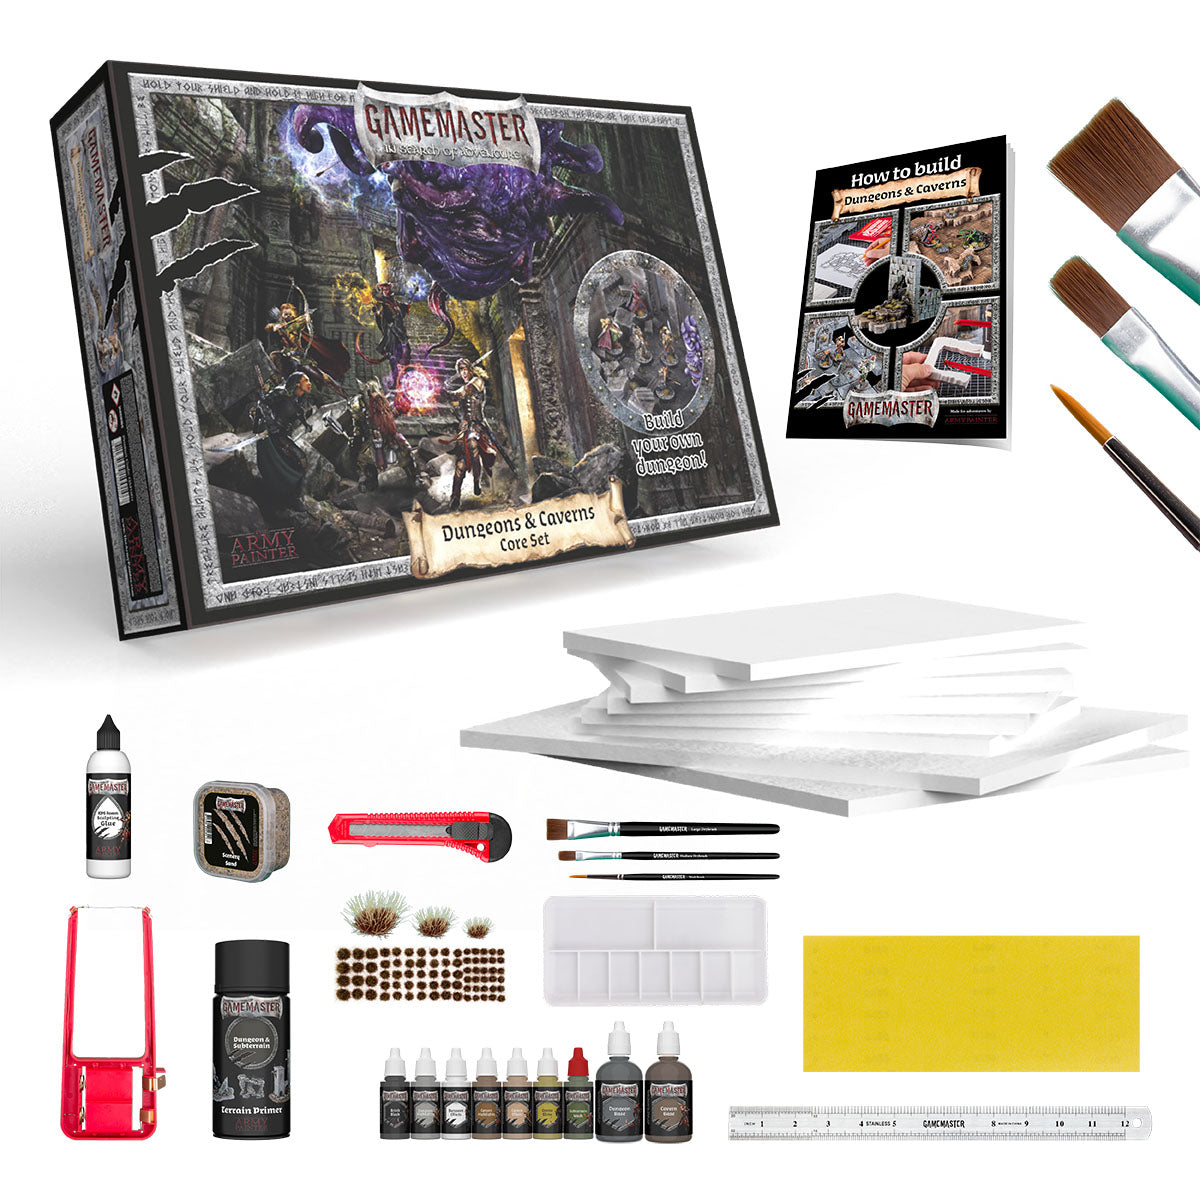 Gamemaster Dungeons and Caverns Core set product images